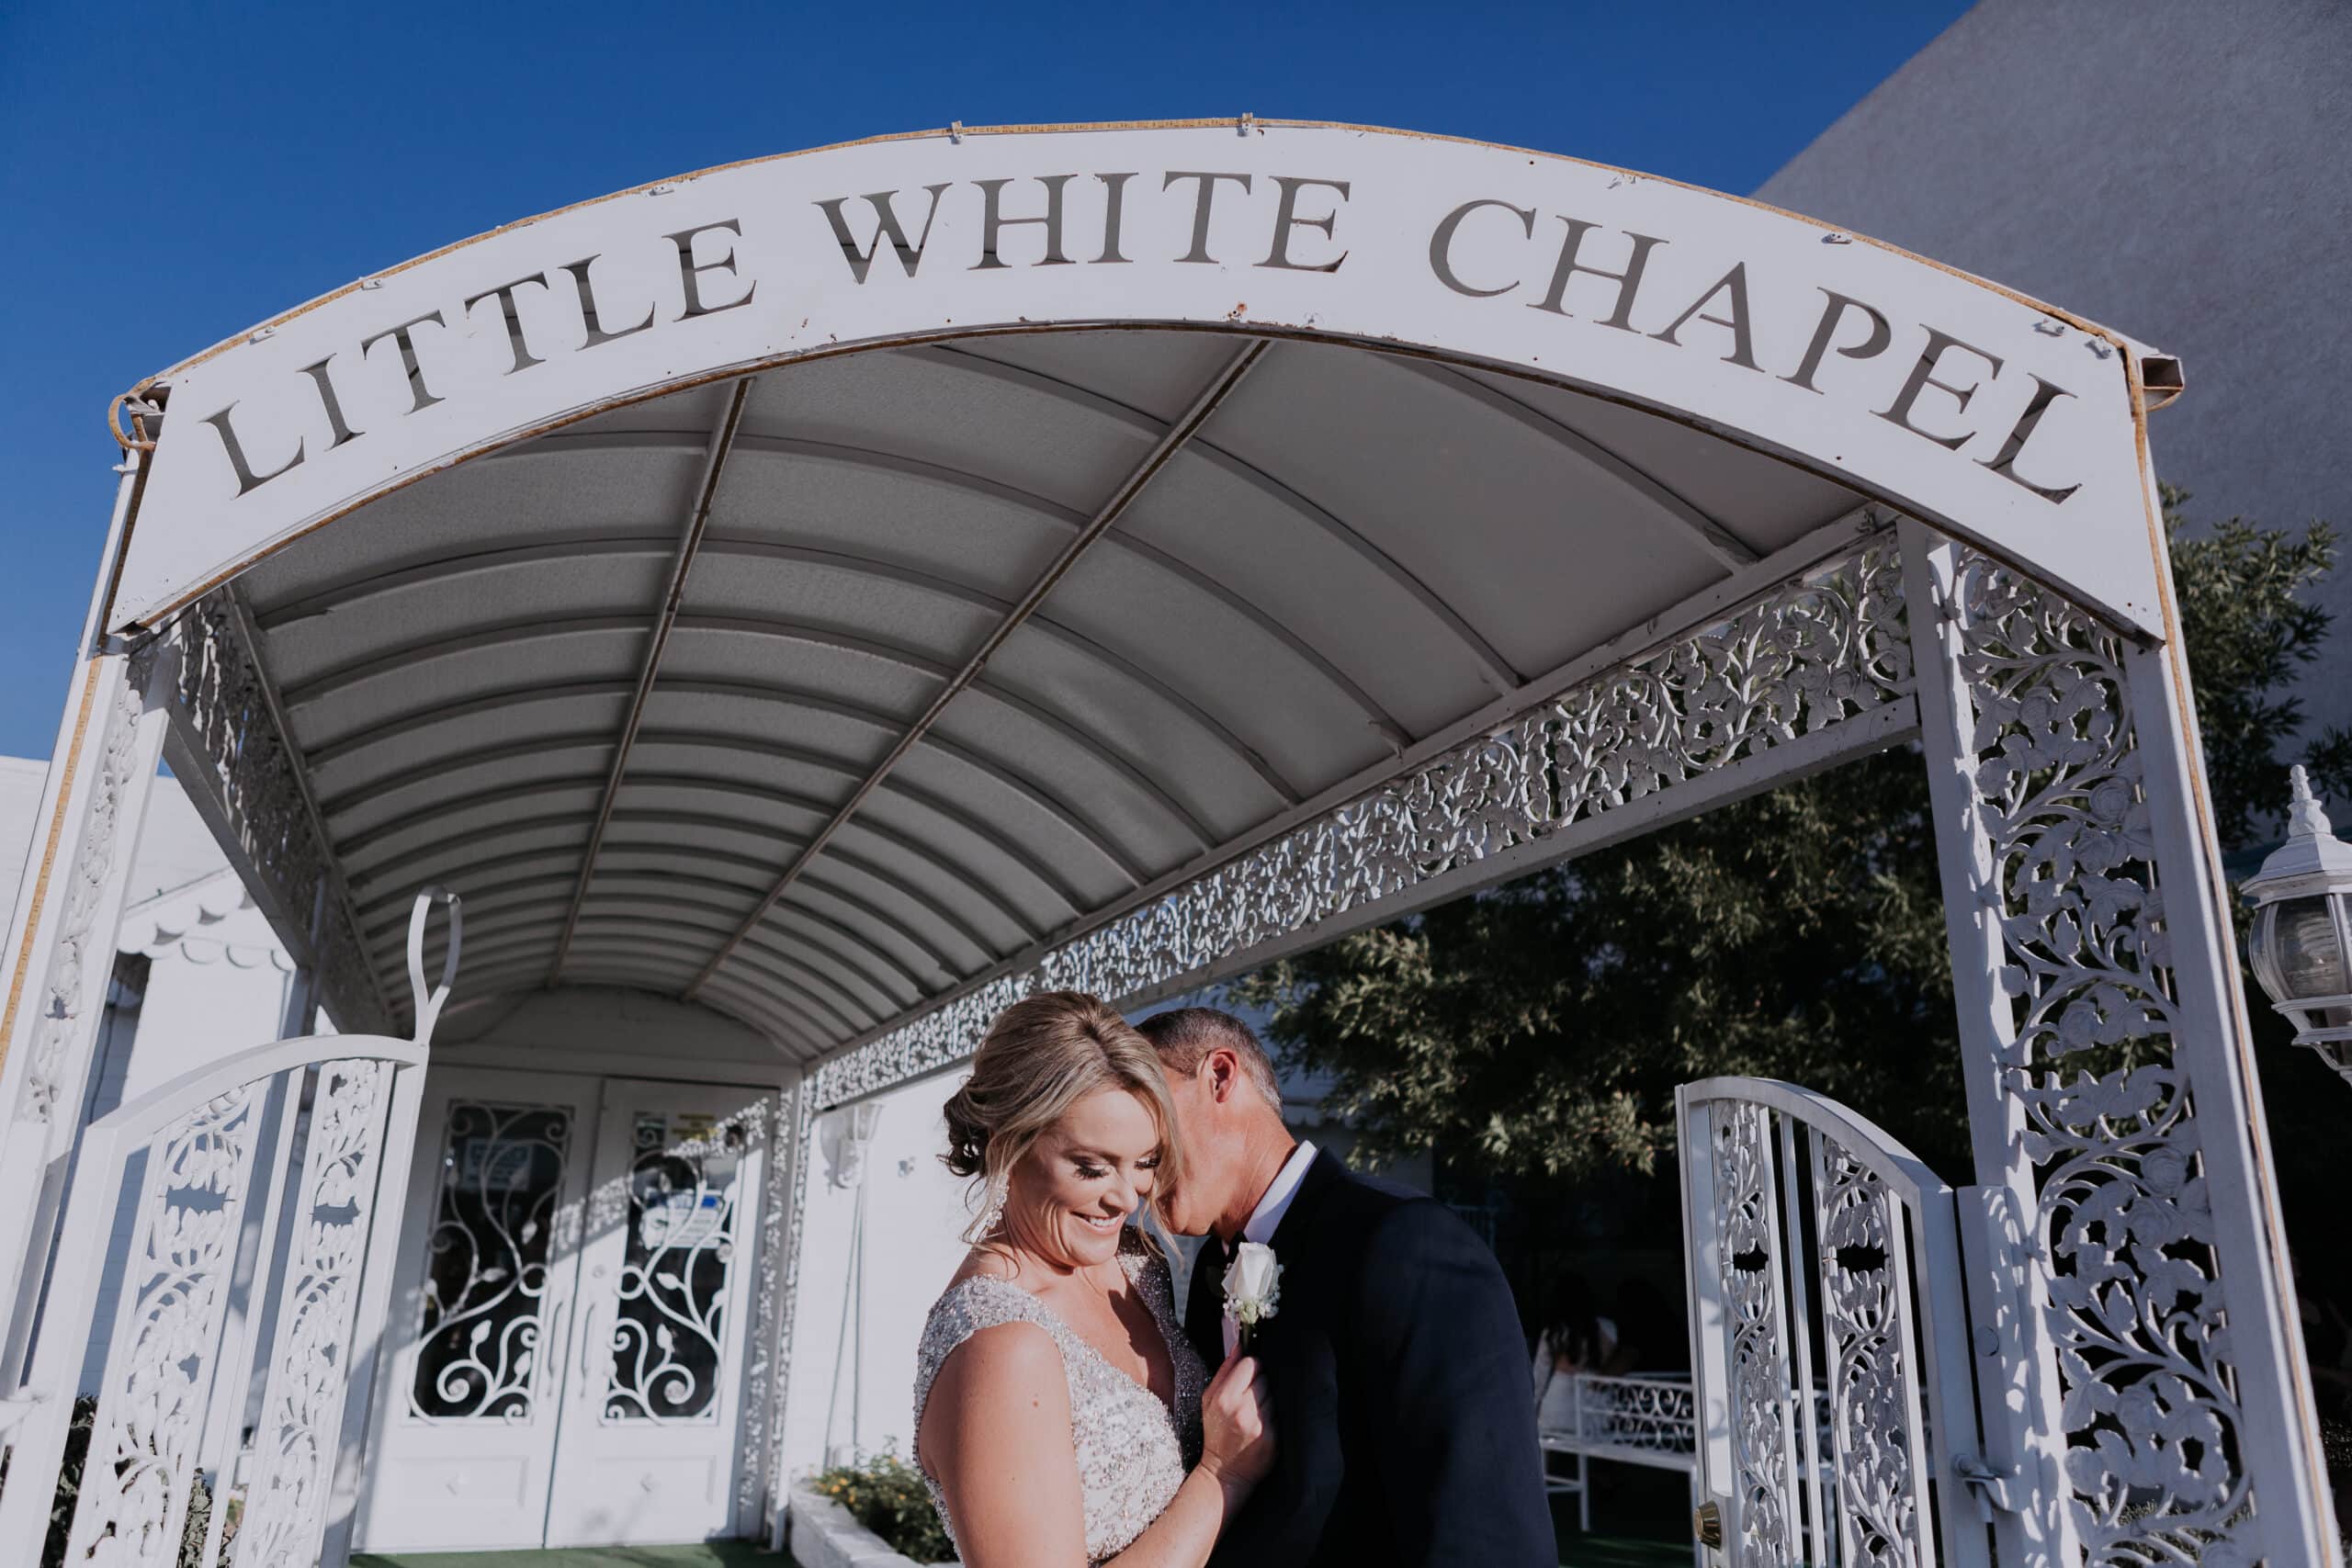 A Groom kisses his bride under the awning of the entrance to A Little White Wedding Chapel in Las Vegas.